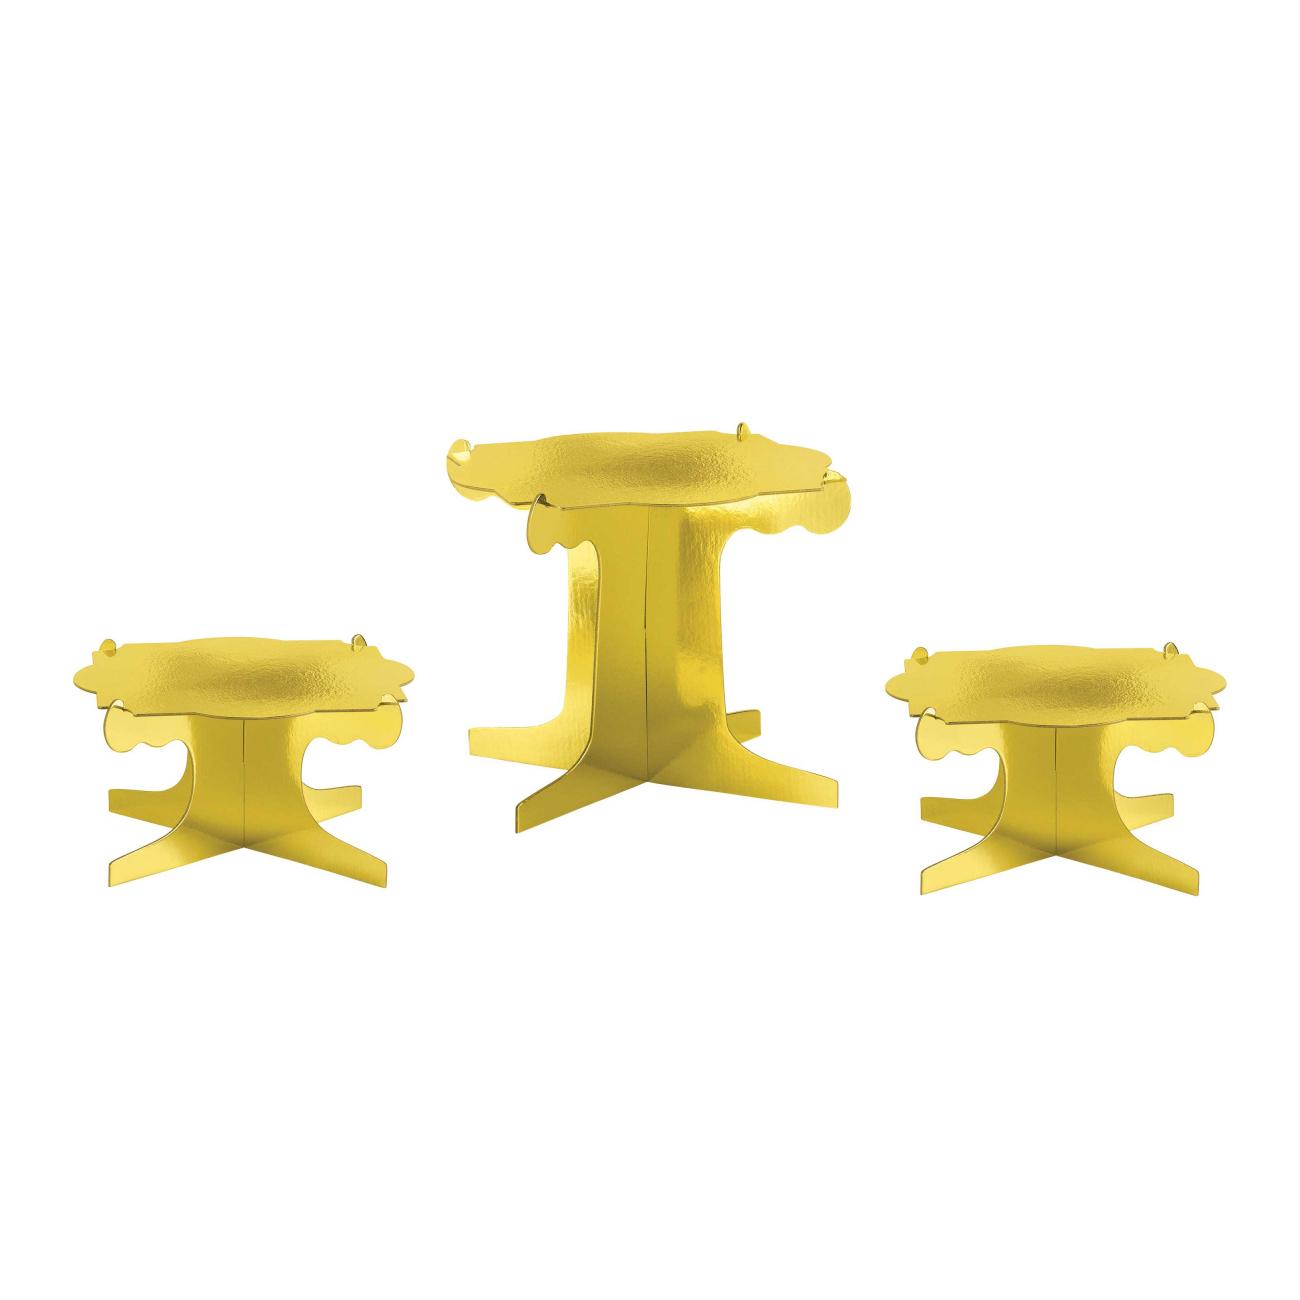 Sweets & Treats Gold Cardboard Display Risers Party Accessories - Party Centre